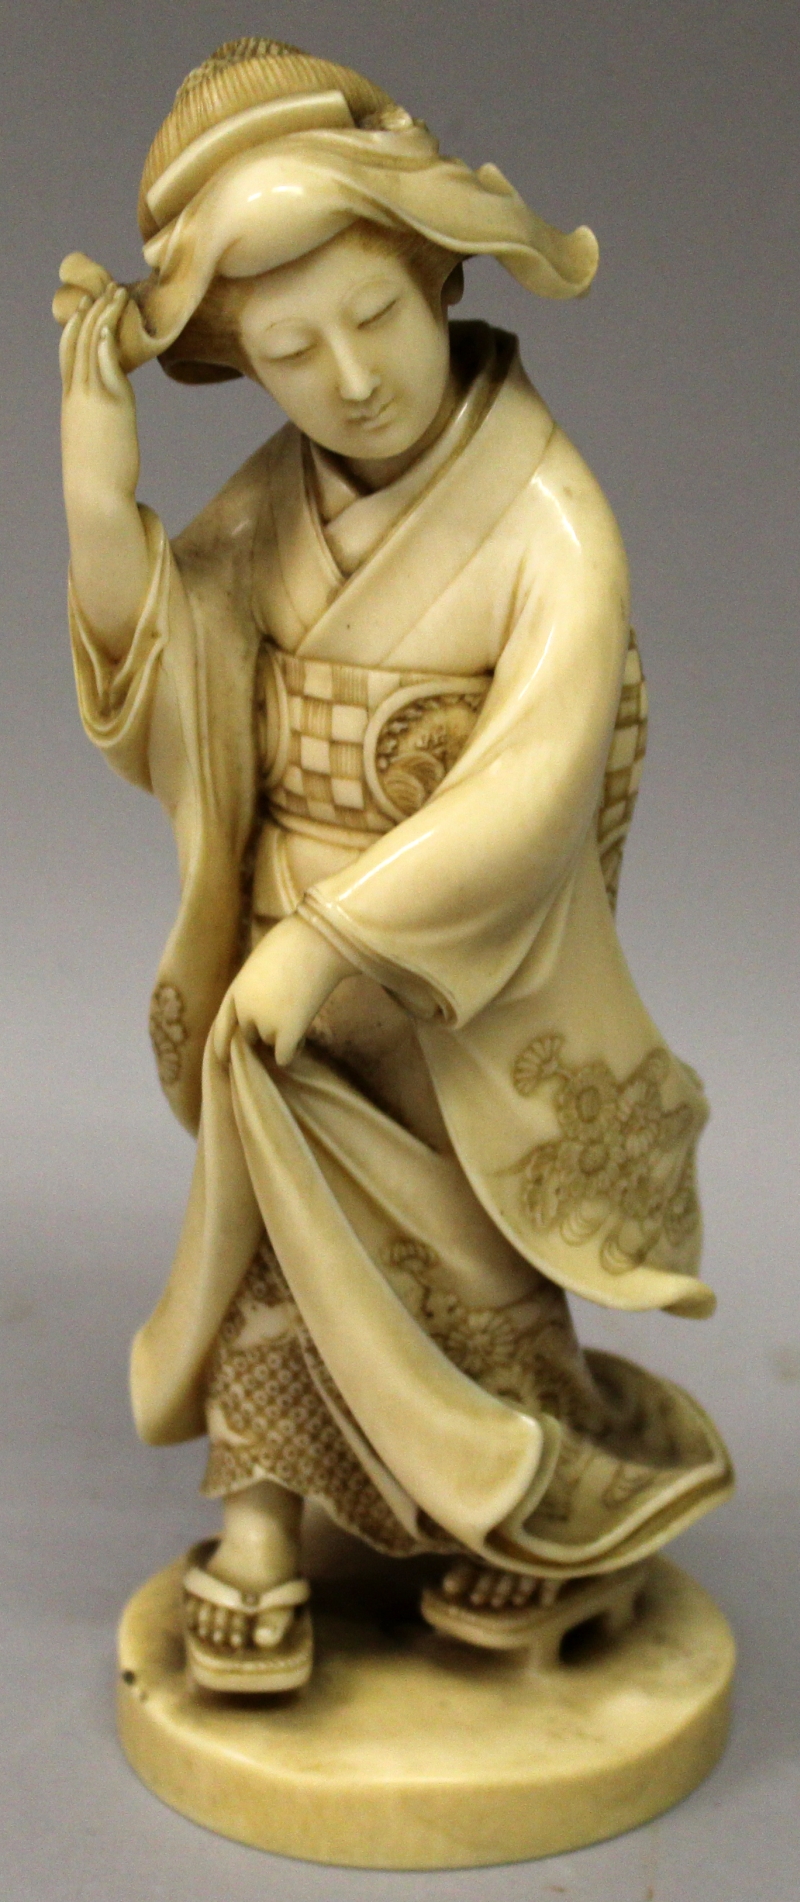 A GOOD QUALITY SIGNED JAPANESE MEIJI PERIOD IVORY OKIMONO OF A BIJIN, walking on geta in floral